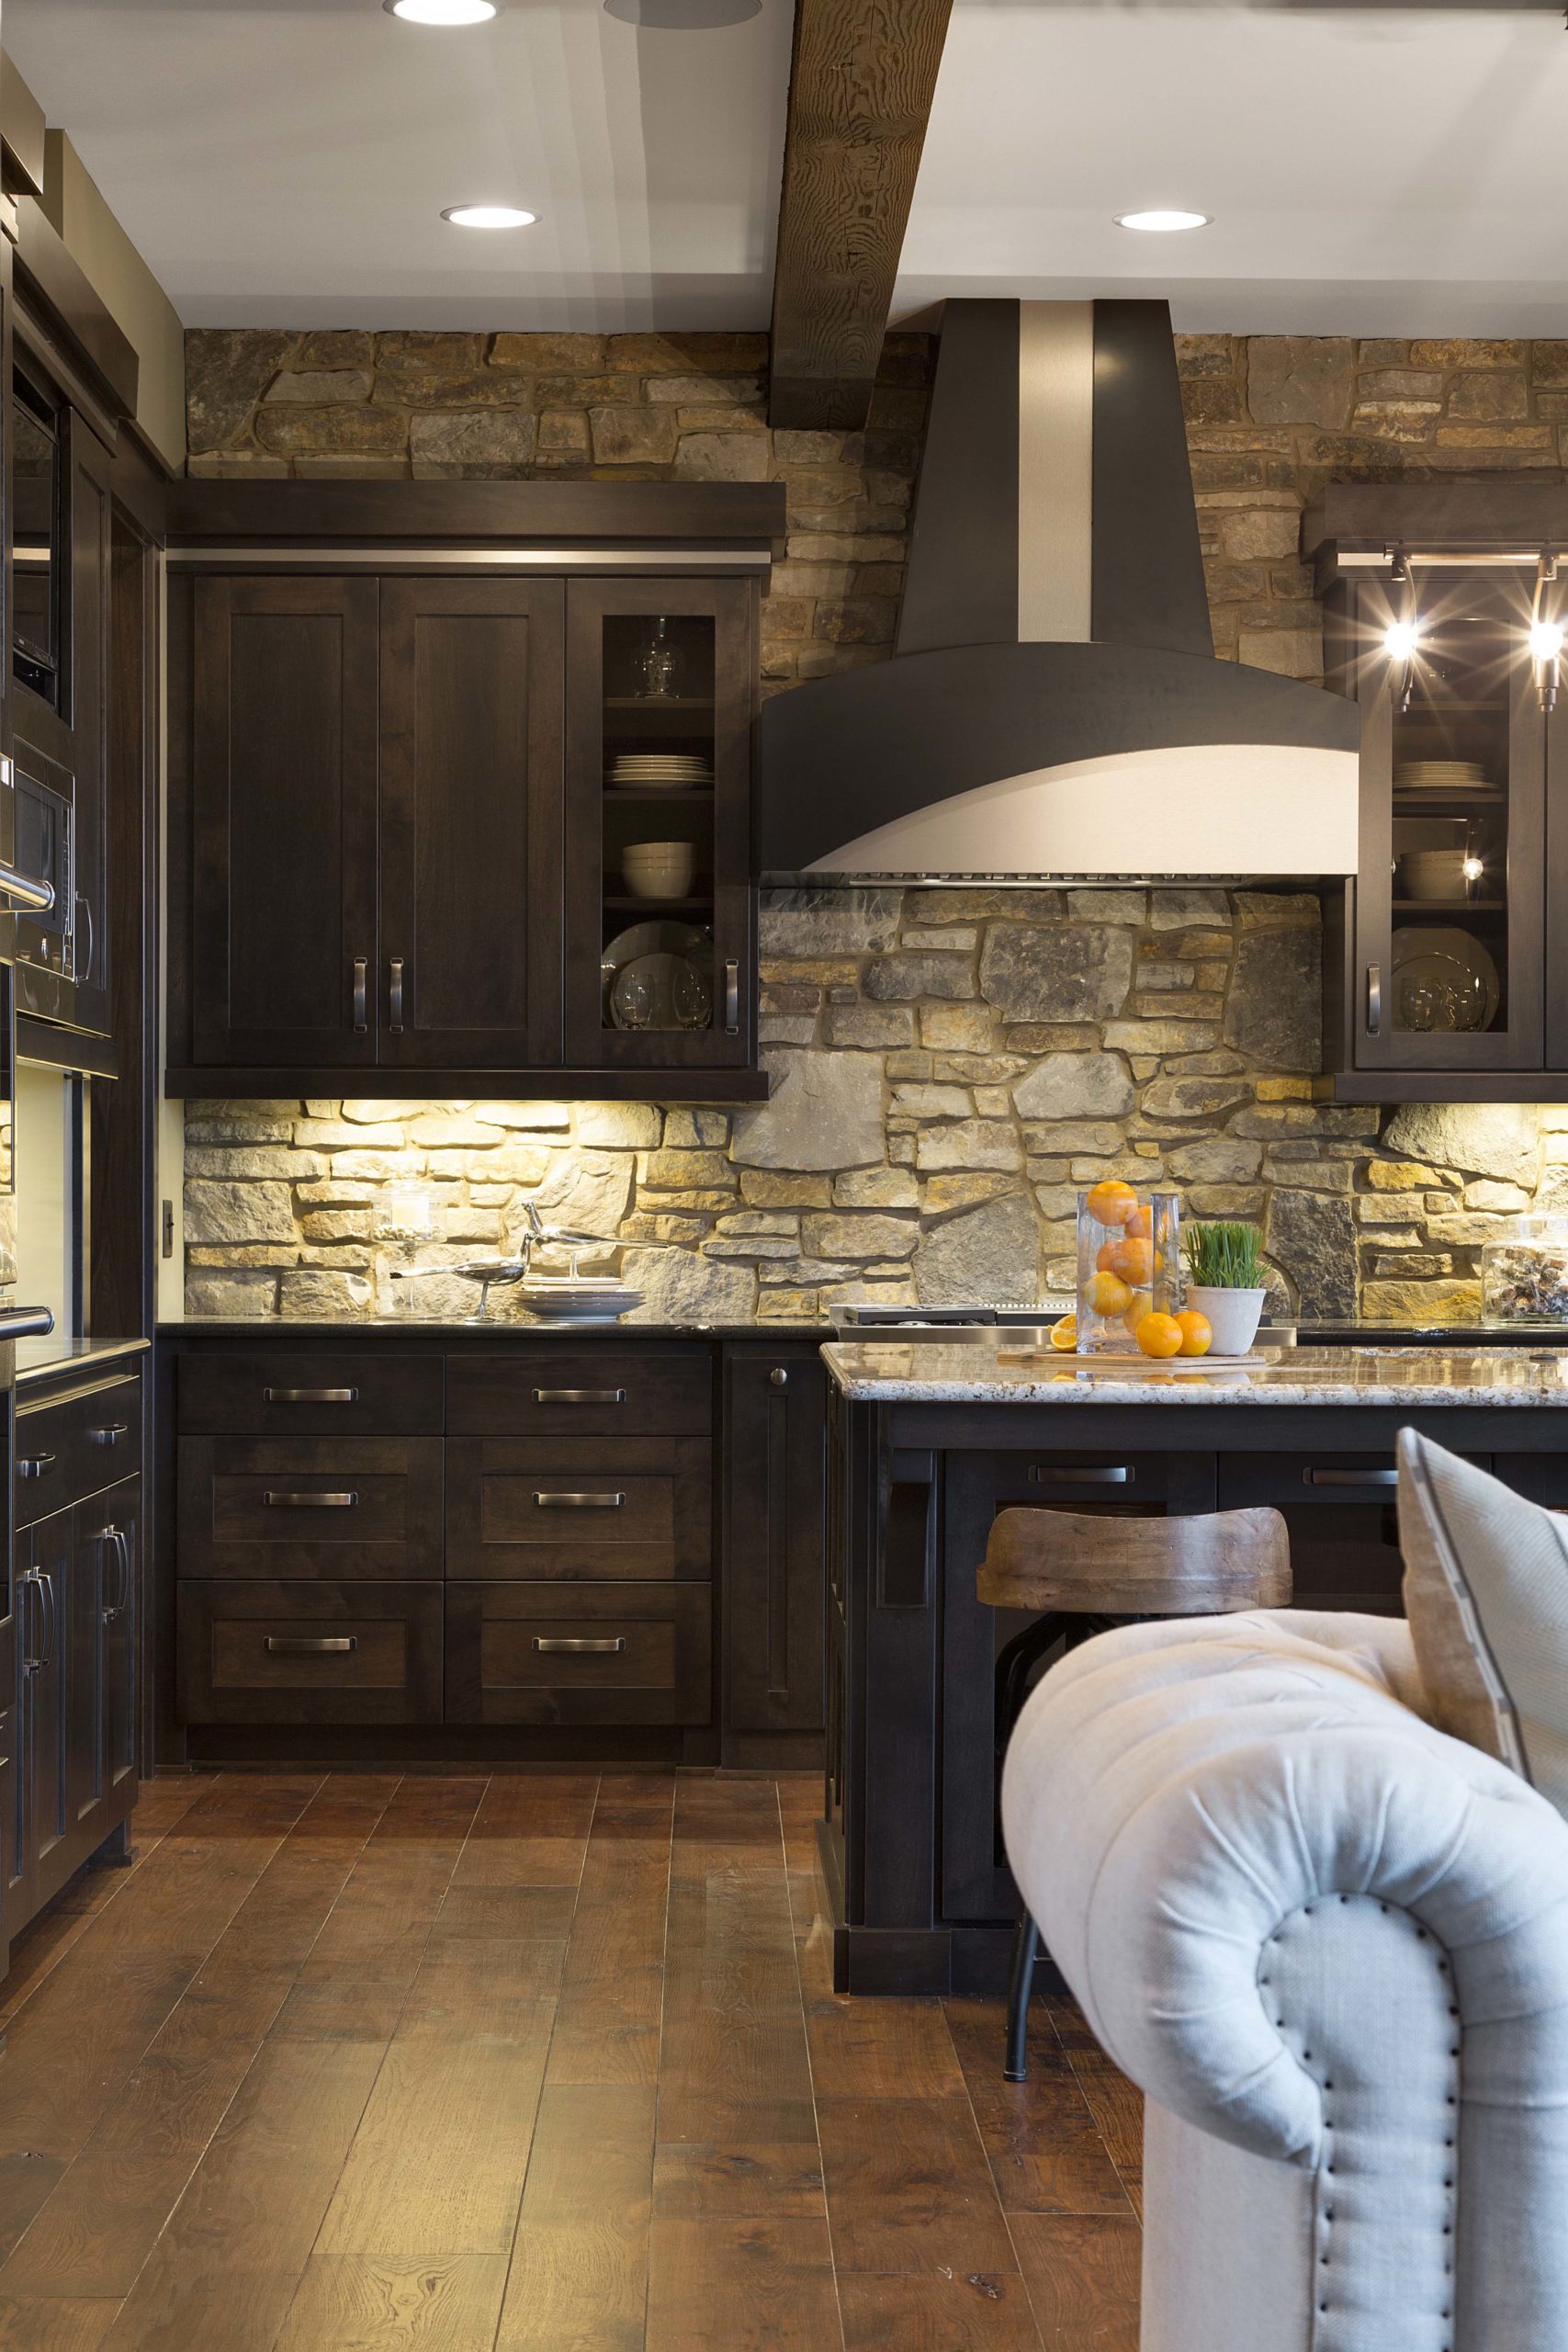 A stone wall in the kitchen.